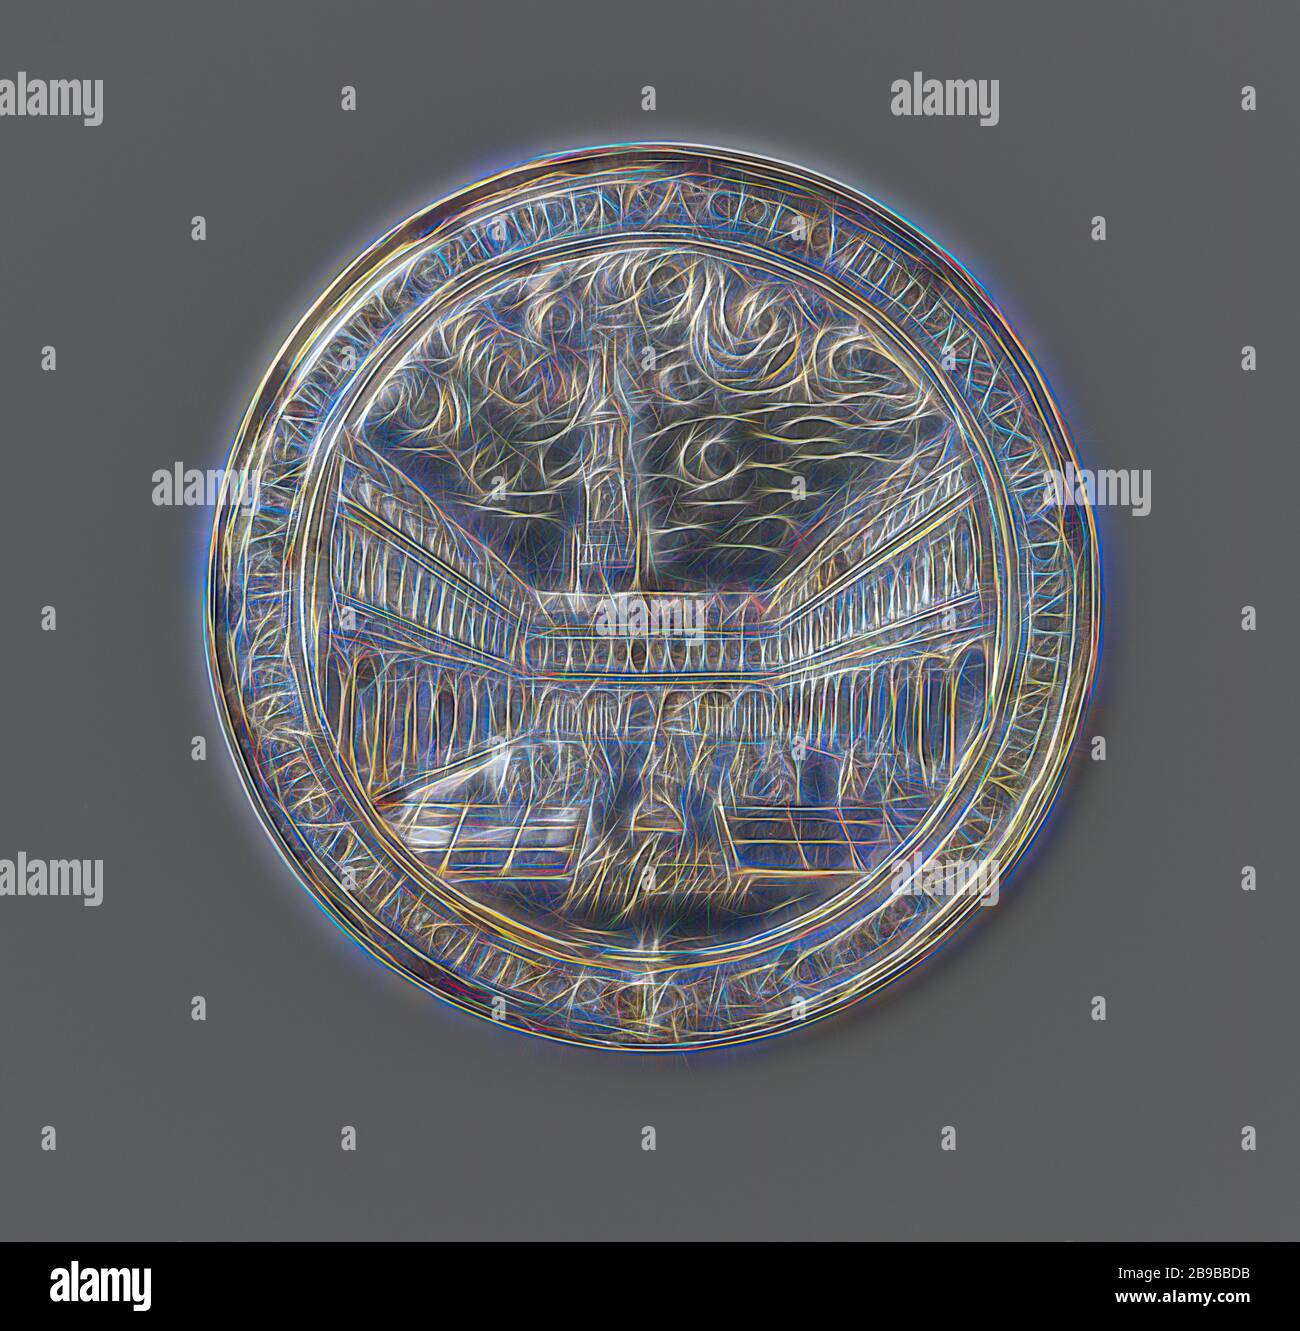 Completion of the Amsterdam stock exchange, Silver Medal. Front: newly established stock exchange building within a circular design. Reverse: inscription with crossed Mercury staff and olive branch below, Amsterdam, anonymous, c. 1400 - c. 1885, silver (metal), engraving, d 7 cm × w 54.70 gr, Reimagined by Gibon, design of warm cheerful glowing of brightness and light rays radiance. Classic art reinvented with a modern twist. Photography inspired by futurism, embracing dynamic energy of modern technology, movement, speed and revolutionize culture. Stock Photo